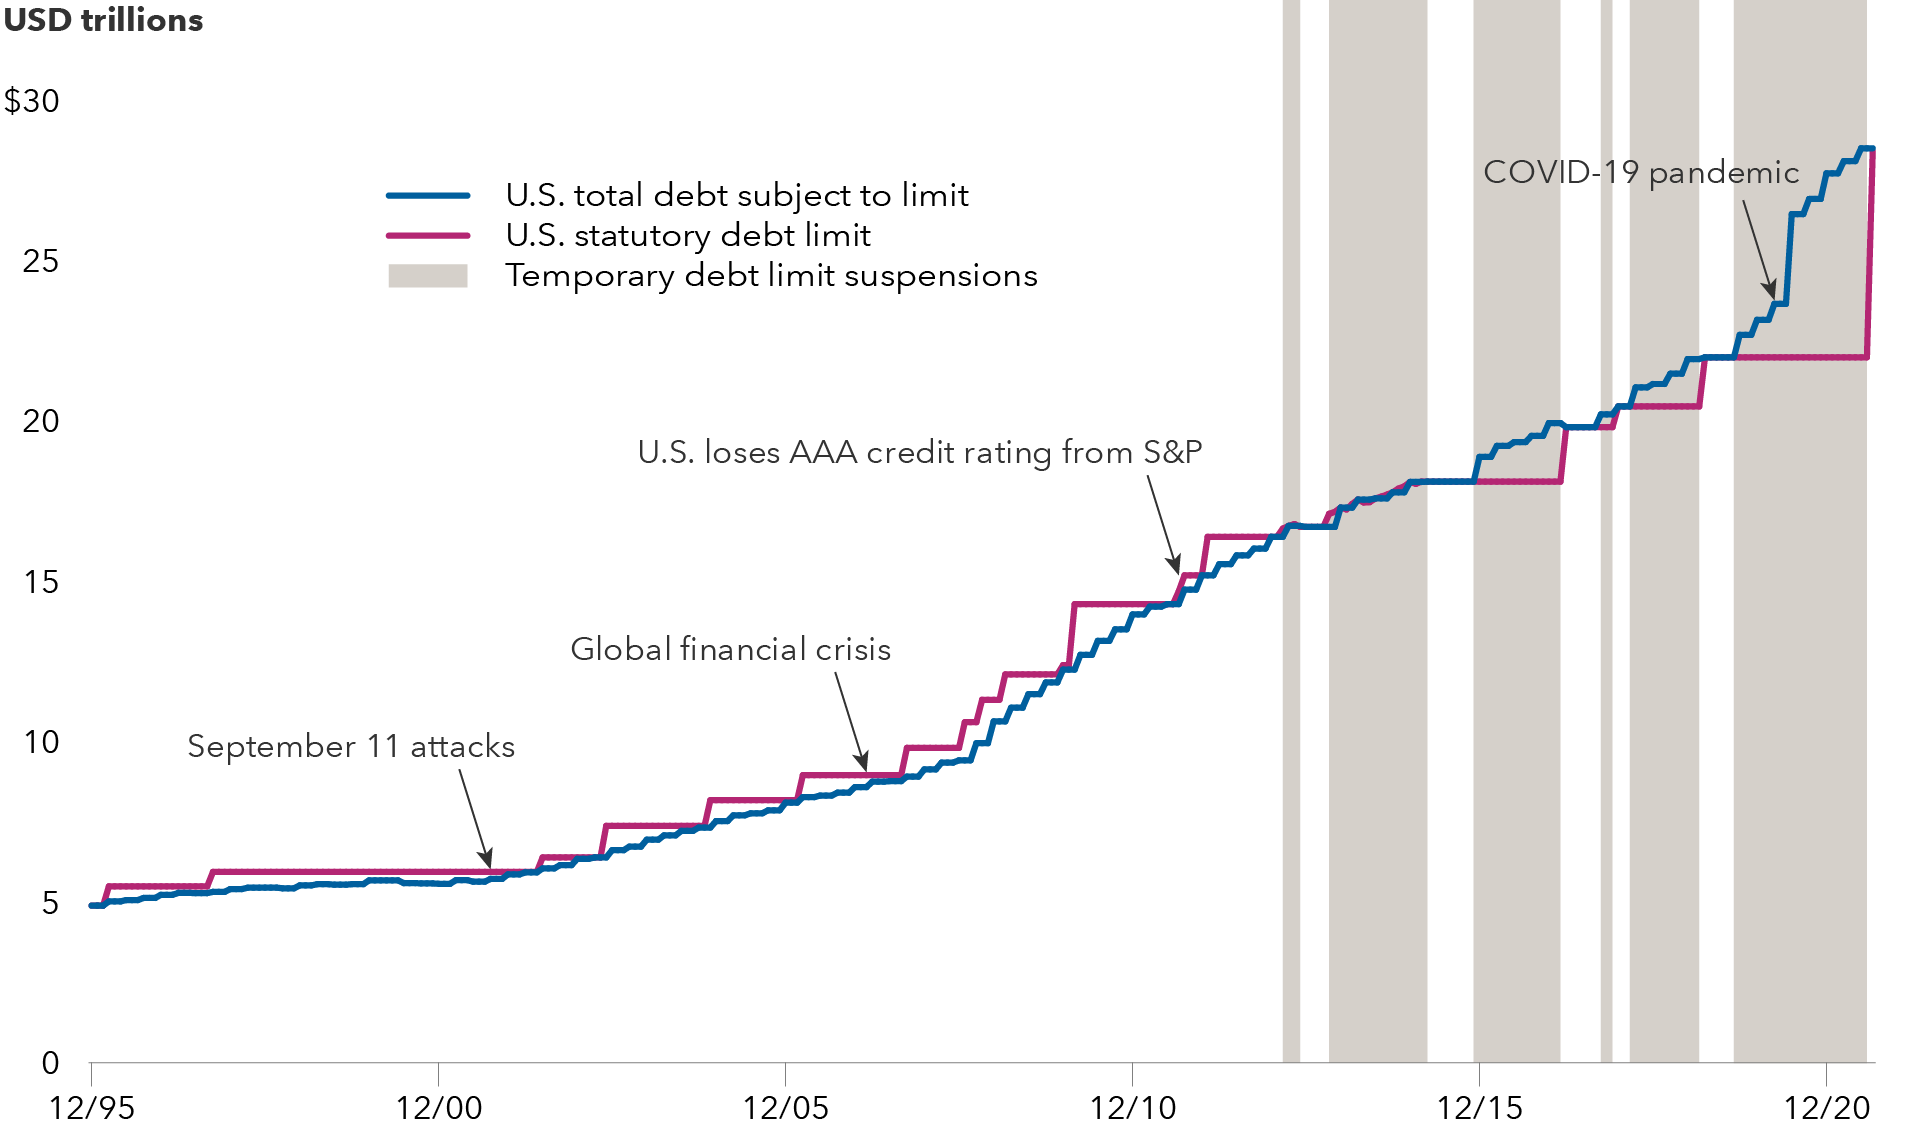 The image shows the U.S. statutory debt limit and the total U.S. debt subject to the limit from December 31, 1995 to August 31, 2021. Sources: Capital Group, Refinitiv Datastream, U.S. Department of the Treasury, U.S. Office of Management and Budget. Periods in which the statutory limit has been suspended are reflected by the shaded vertical bars, namely from February 2013–May 2013; October 2013–March 2015; November 2015–March 2017; September 2017–December 2017; January 2018–February 2019; and August 2019–July 2021.